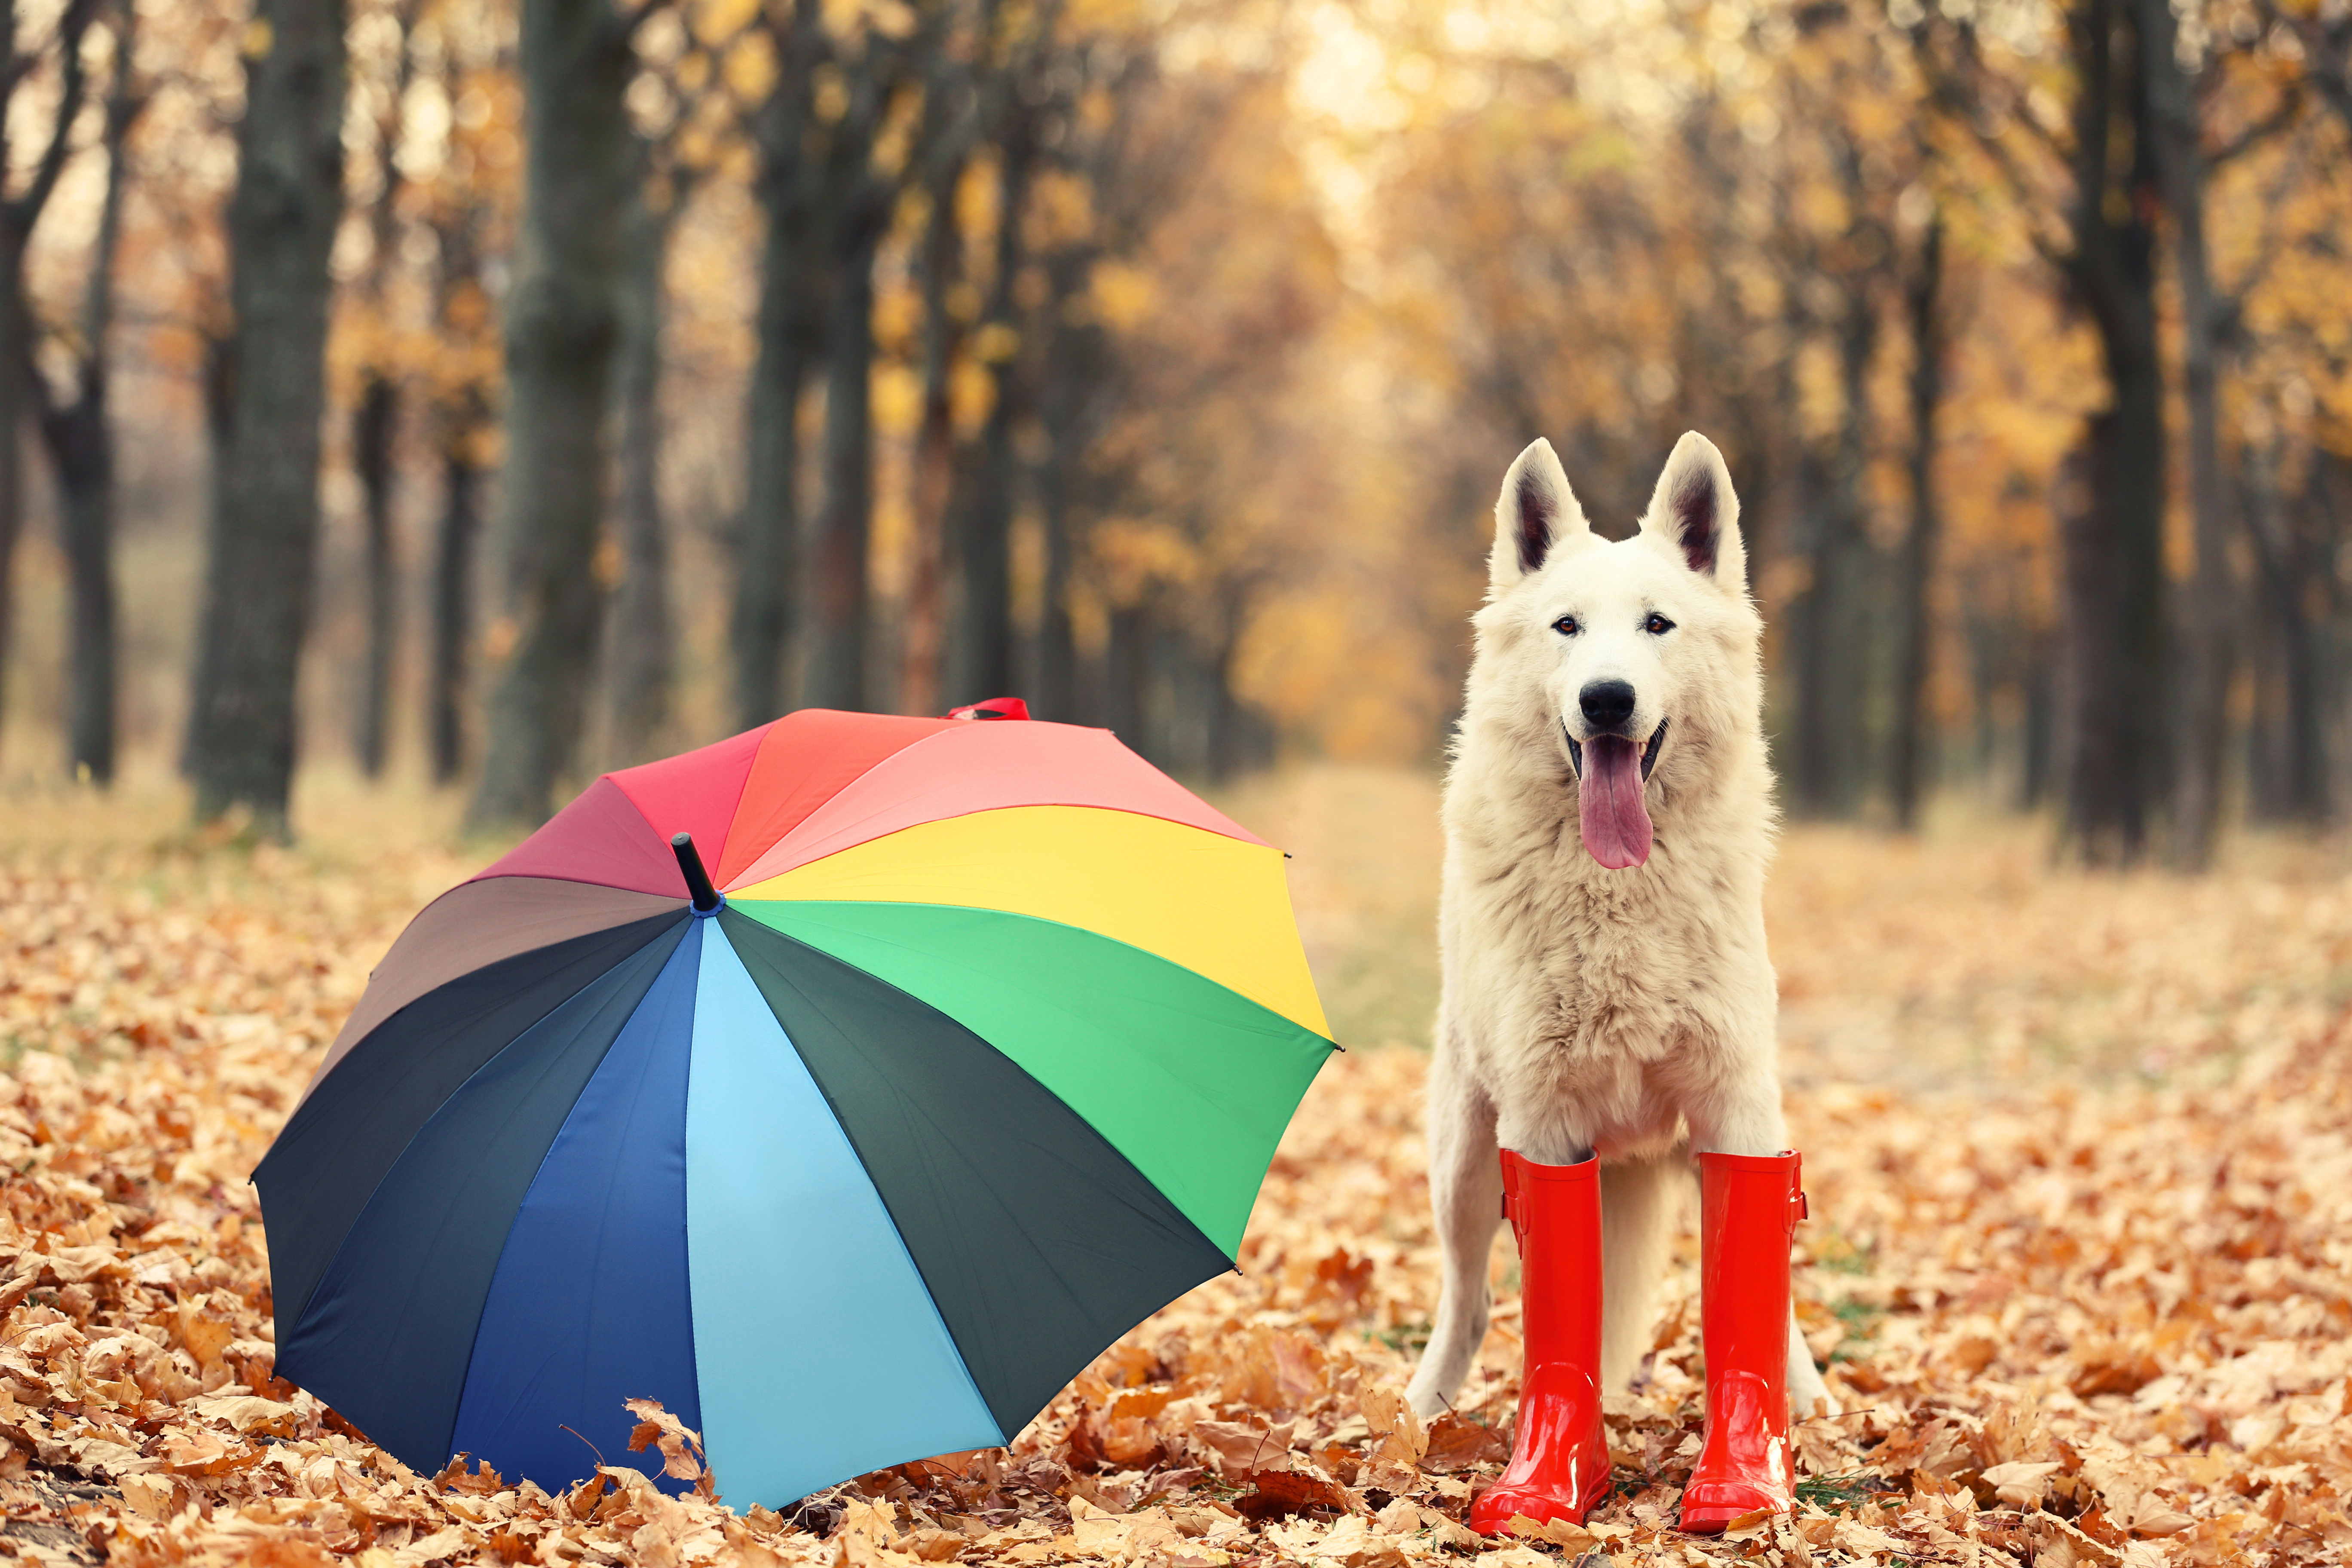 White swiss shepherd dog in red rubber boots with colorful umbrella